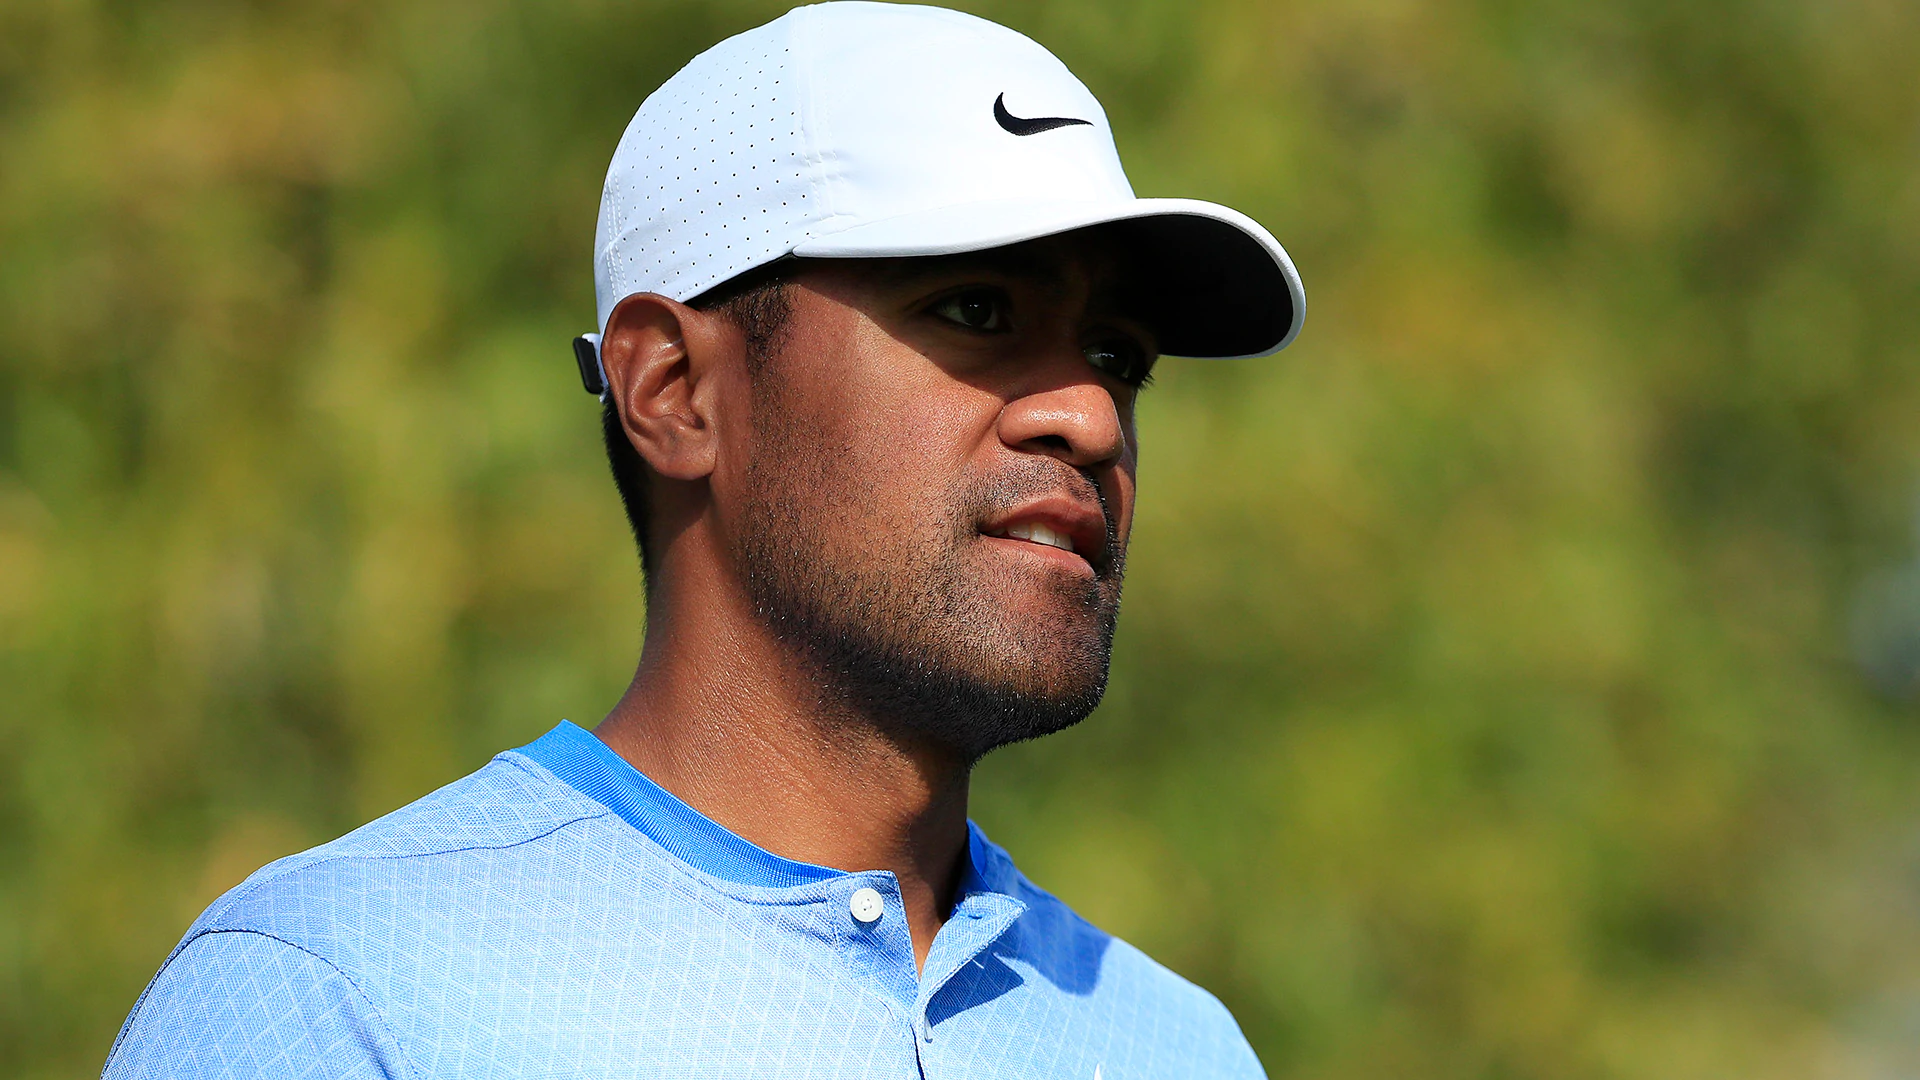 ‘Disrespected and mistreated’: Tony Finau details 2014 incident with police